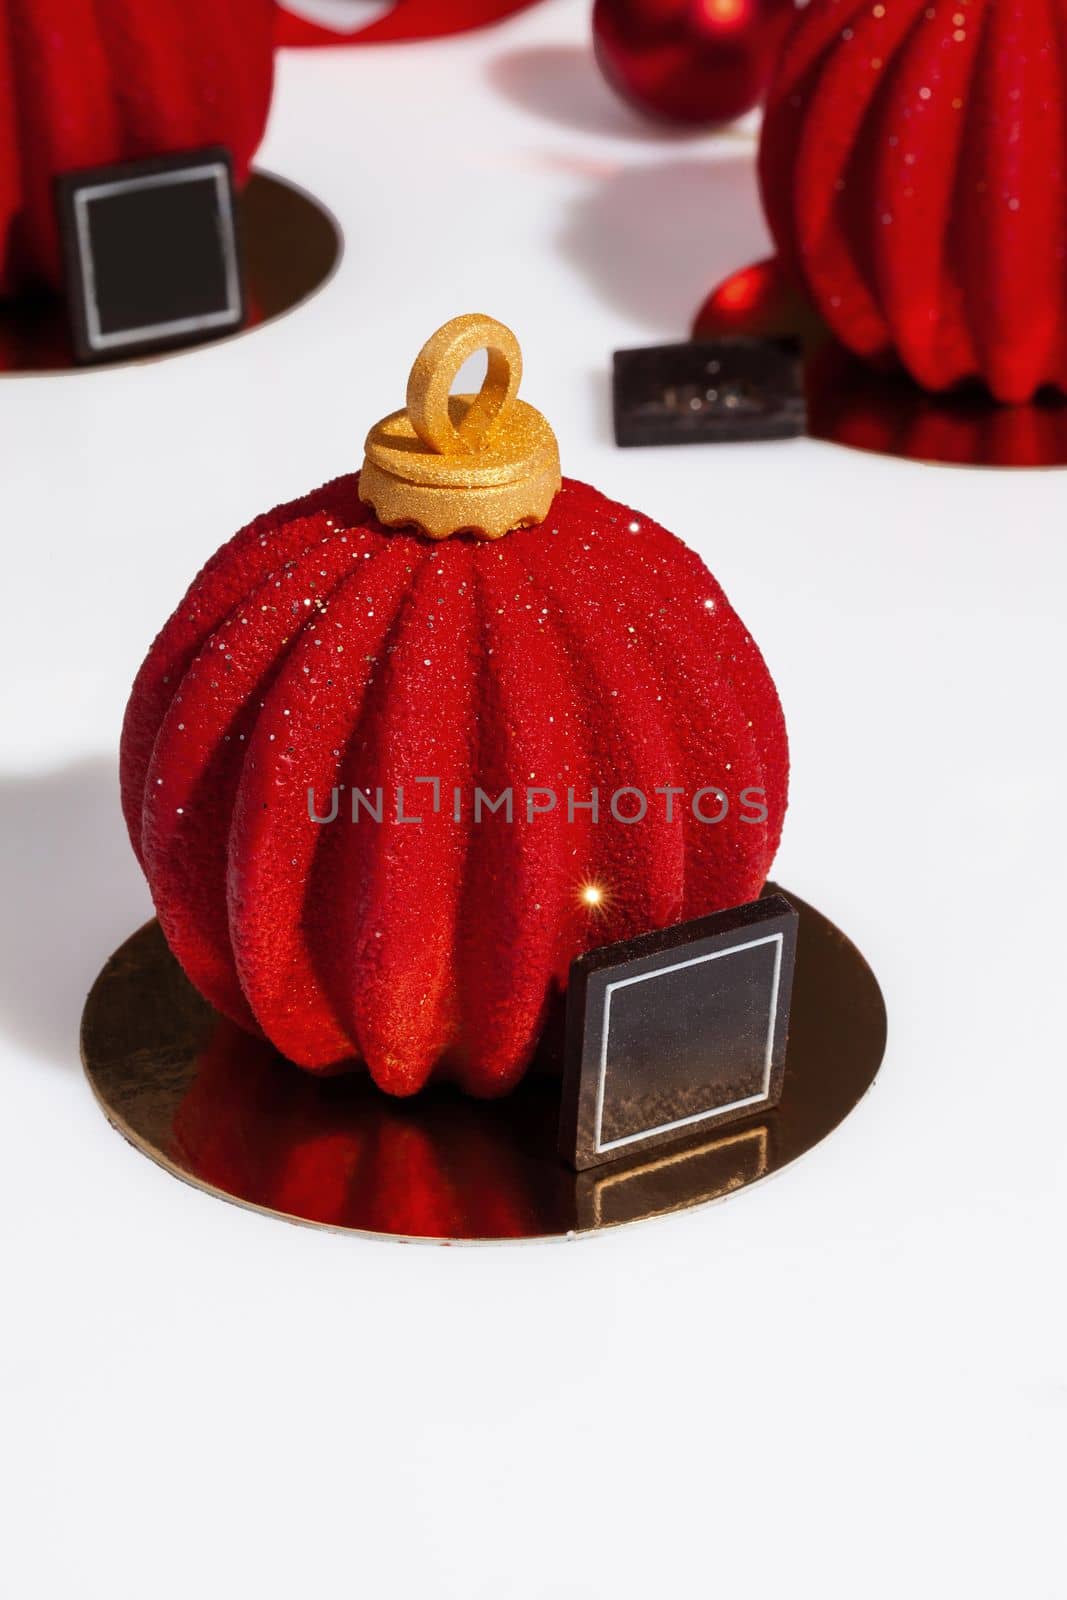 Red Christmas ball shaped pastries on golden serving cardboard by nazarovsergey